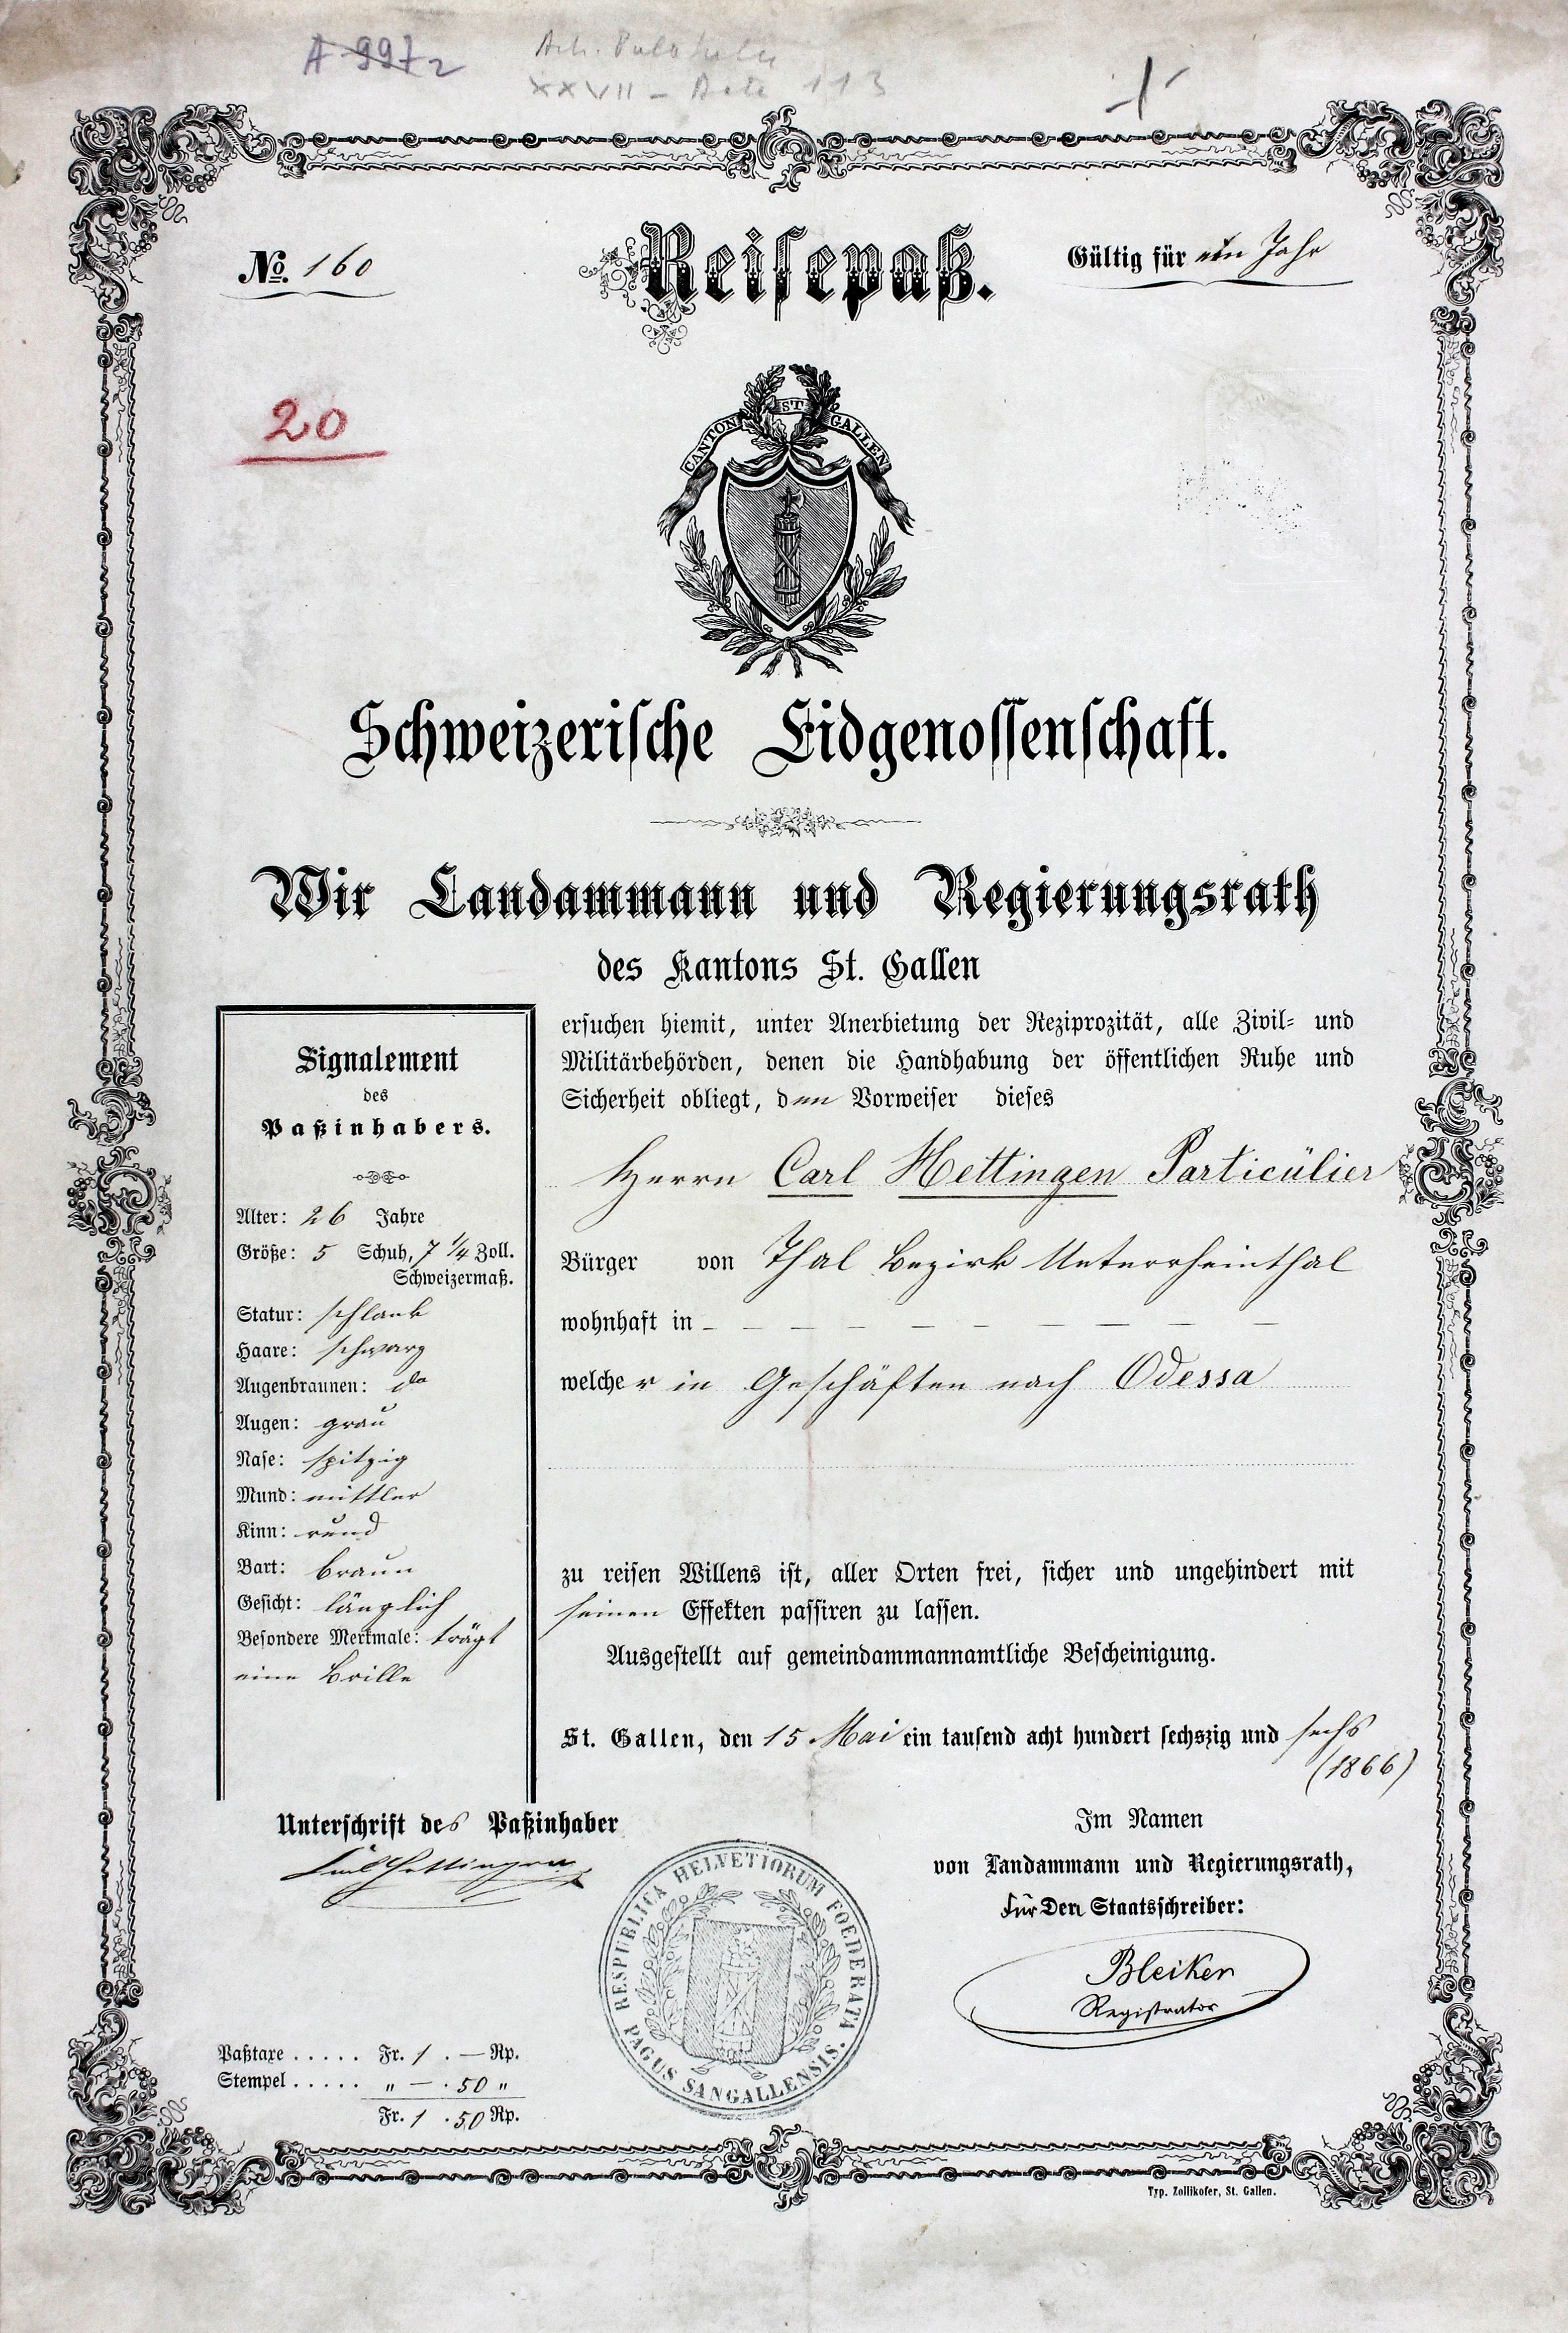 Passport with a fake name Carl Hettingen used by King Carol I (not yet King of Romania, but prince of Hohenzollern) first time when he traveled to Romania, incognito (National Archives of Romania, Bucharest, fond Royal House_Miscelanee_4).